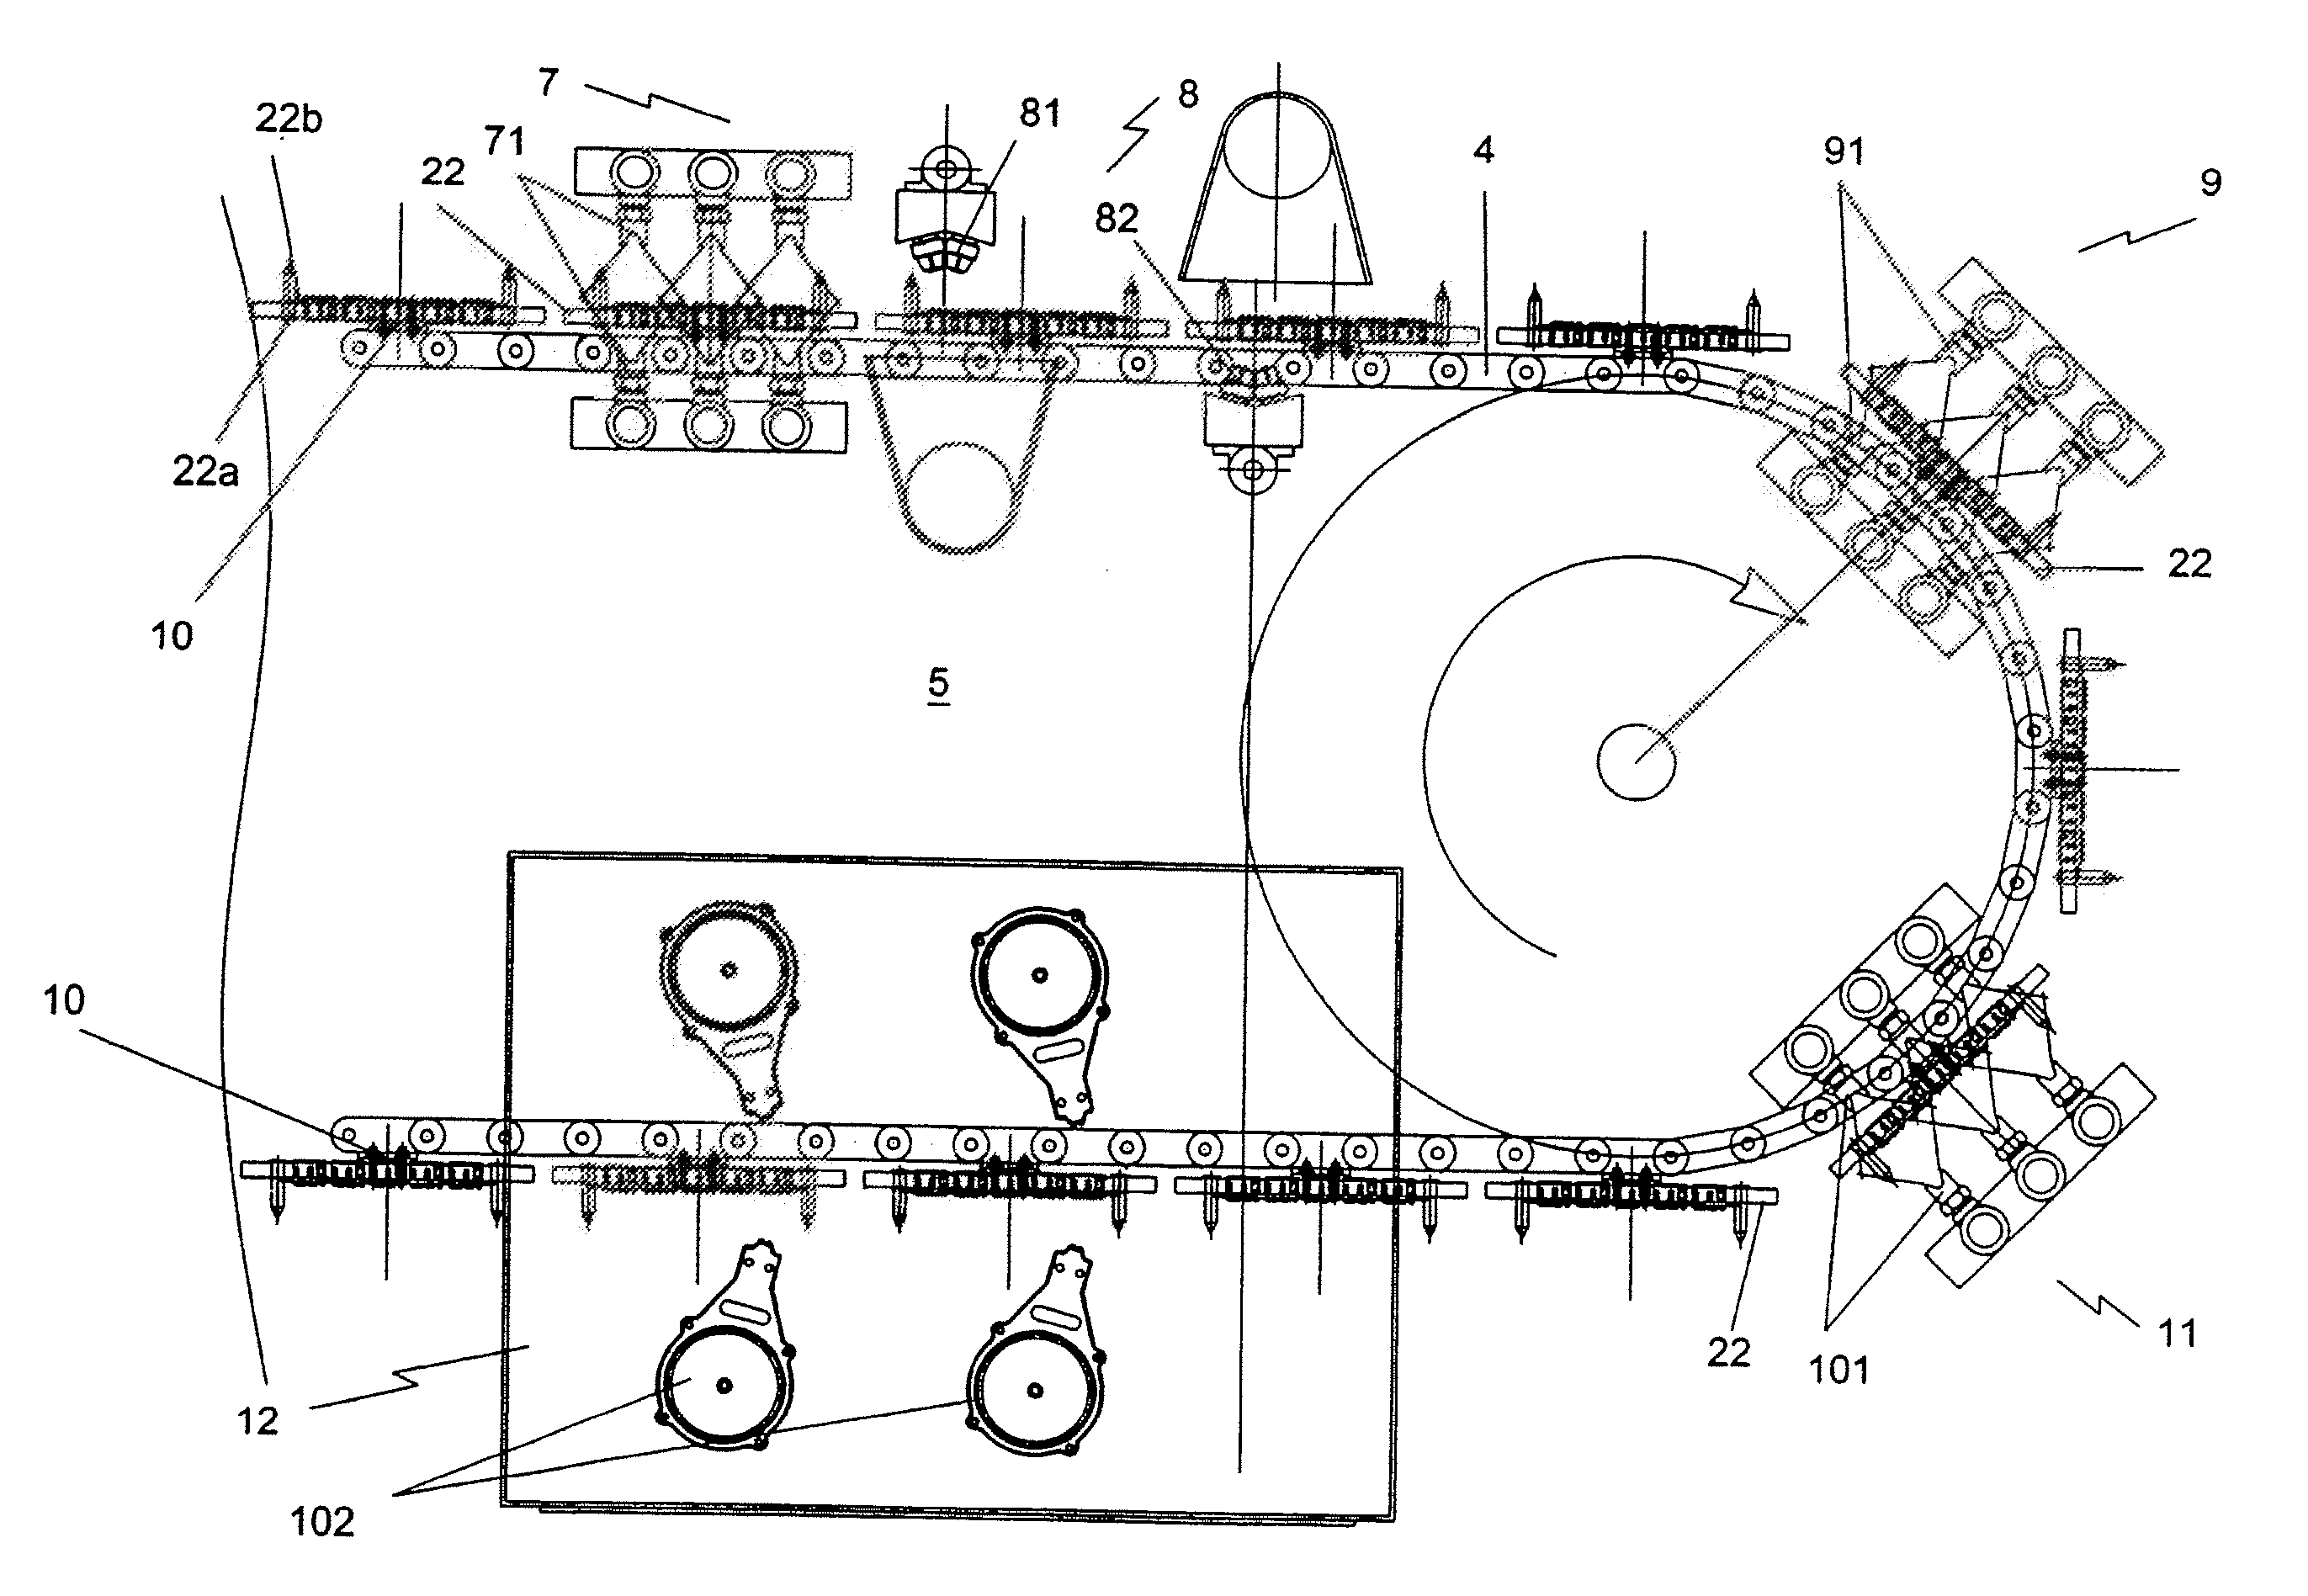 System and Method for Cleaning Process Trays